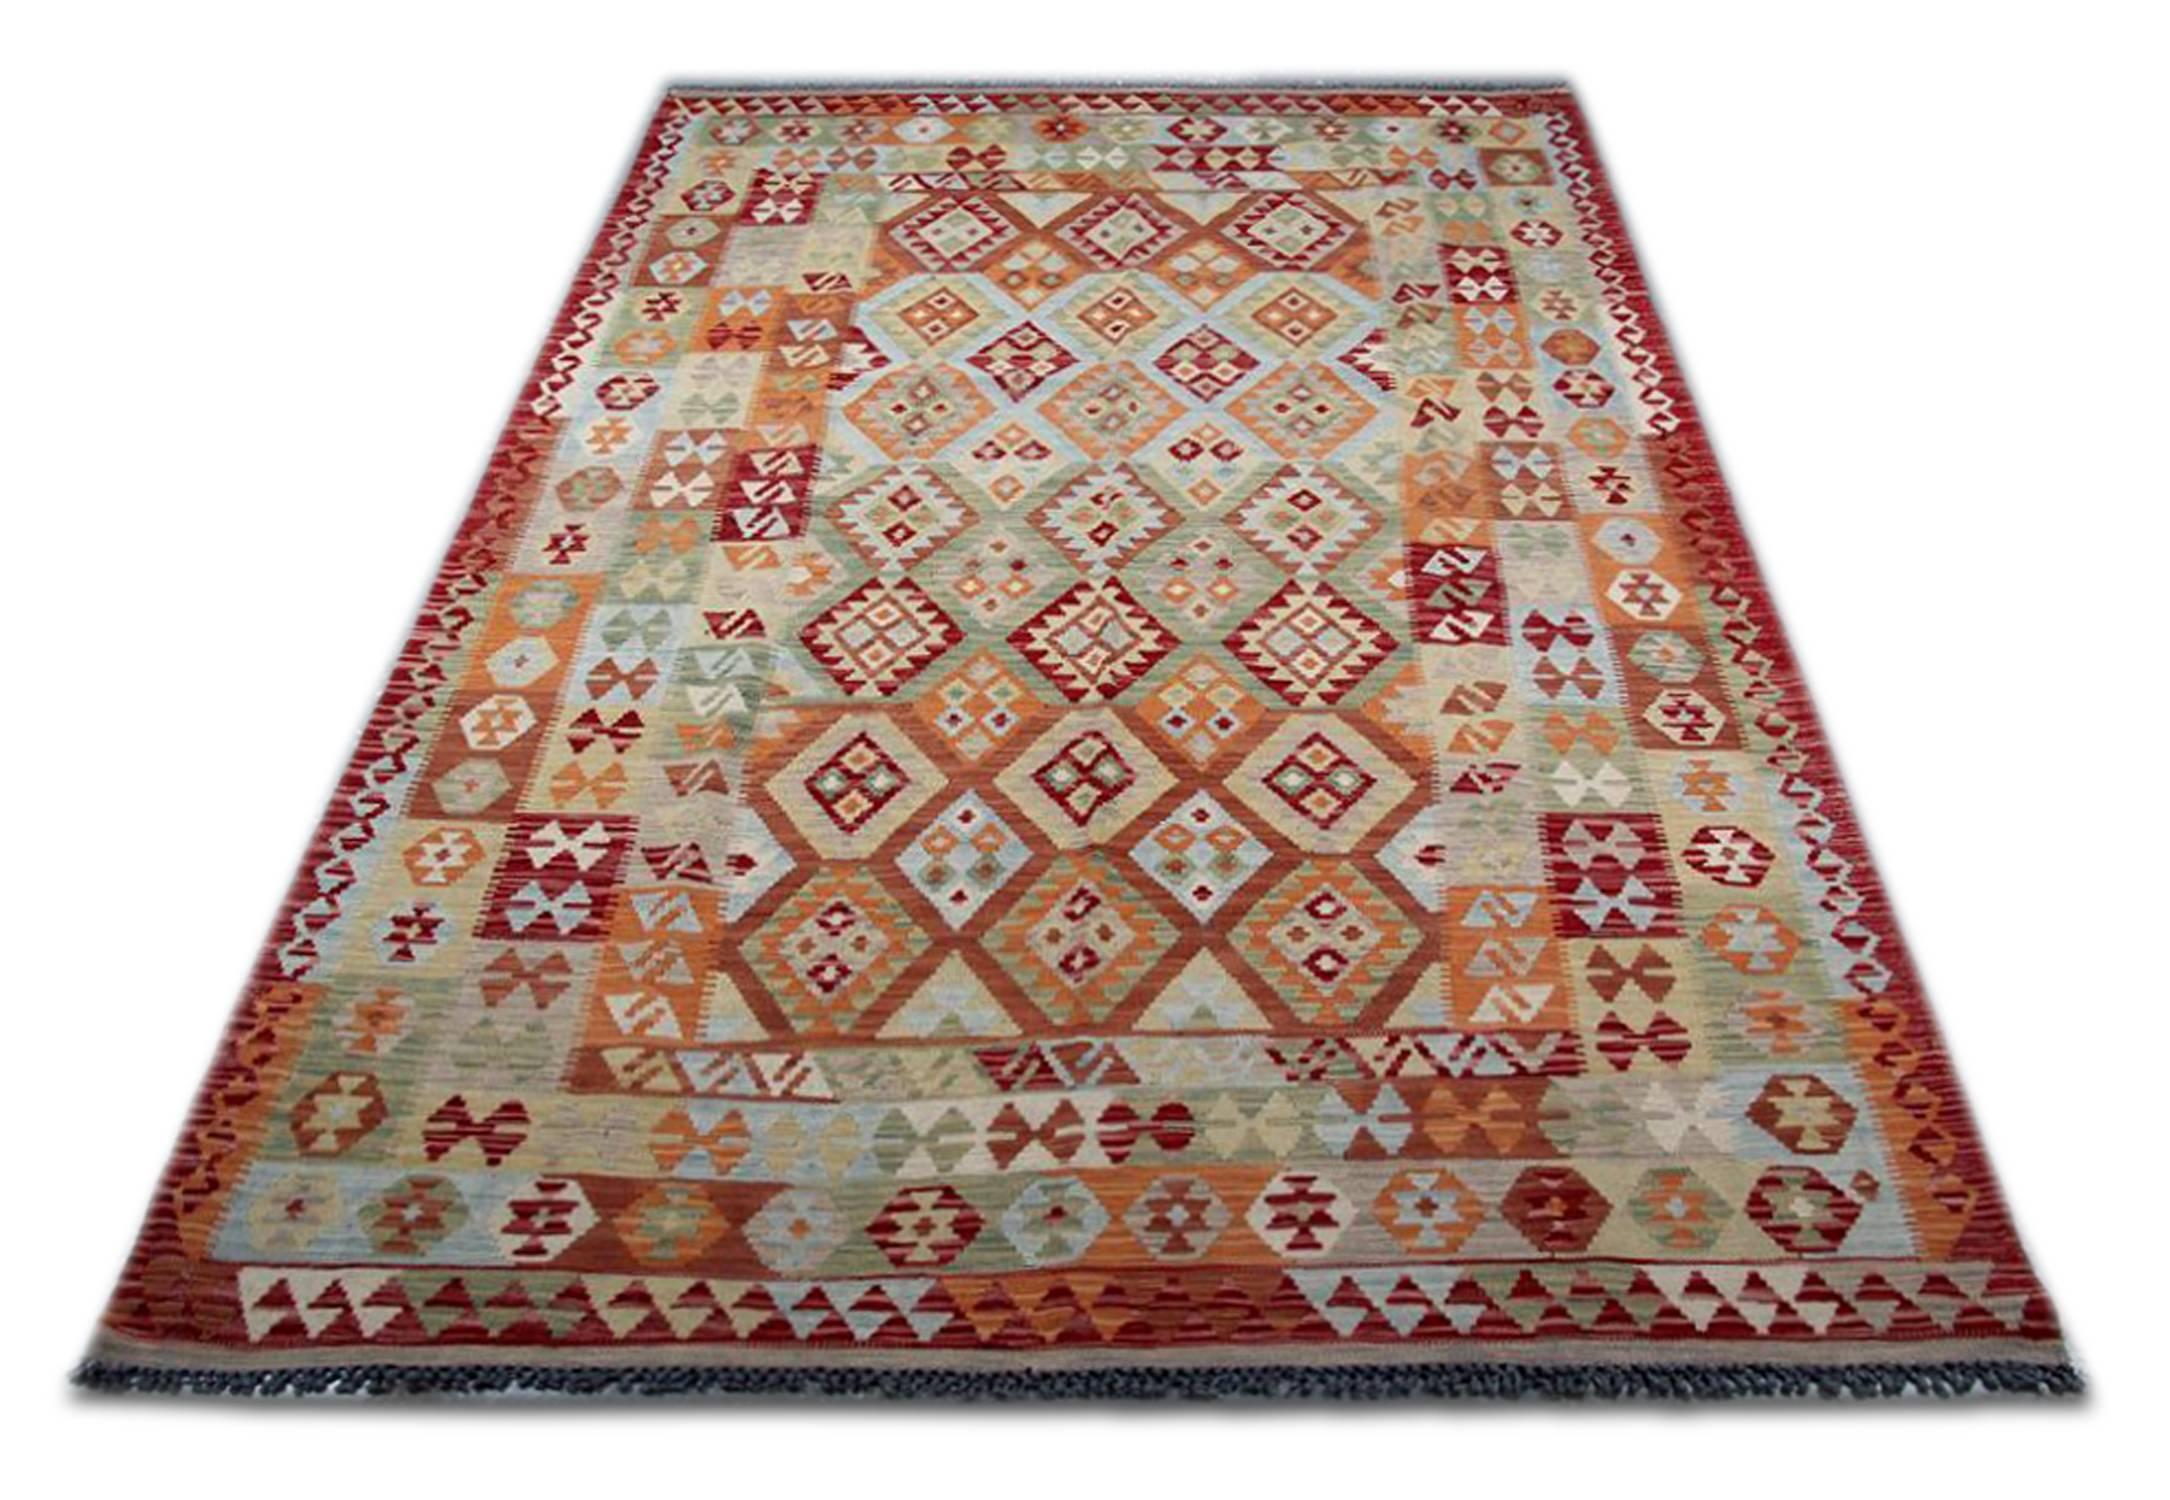 These kilim rugs are handmade in Afghanistan by Uzbek and Turkman tribes. This high-quality woven rug is made of wool and cotton. Plus, only organic dyes have been used for this tribal rug. The designs of these patterned rugs belong to the Persian